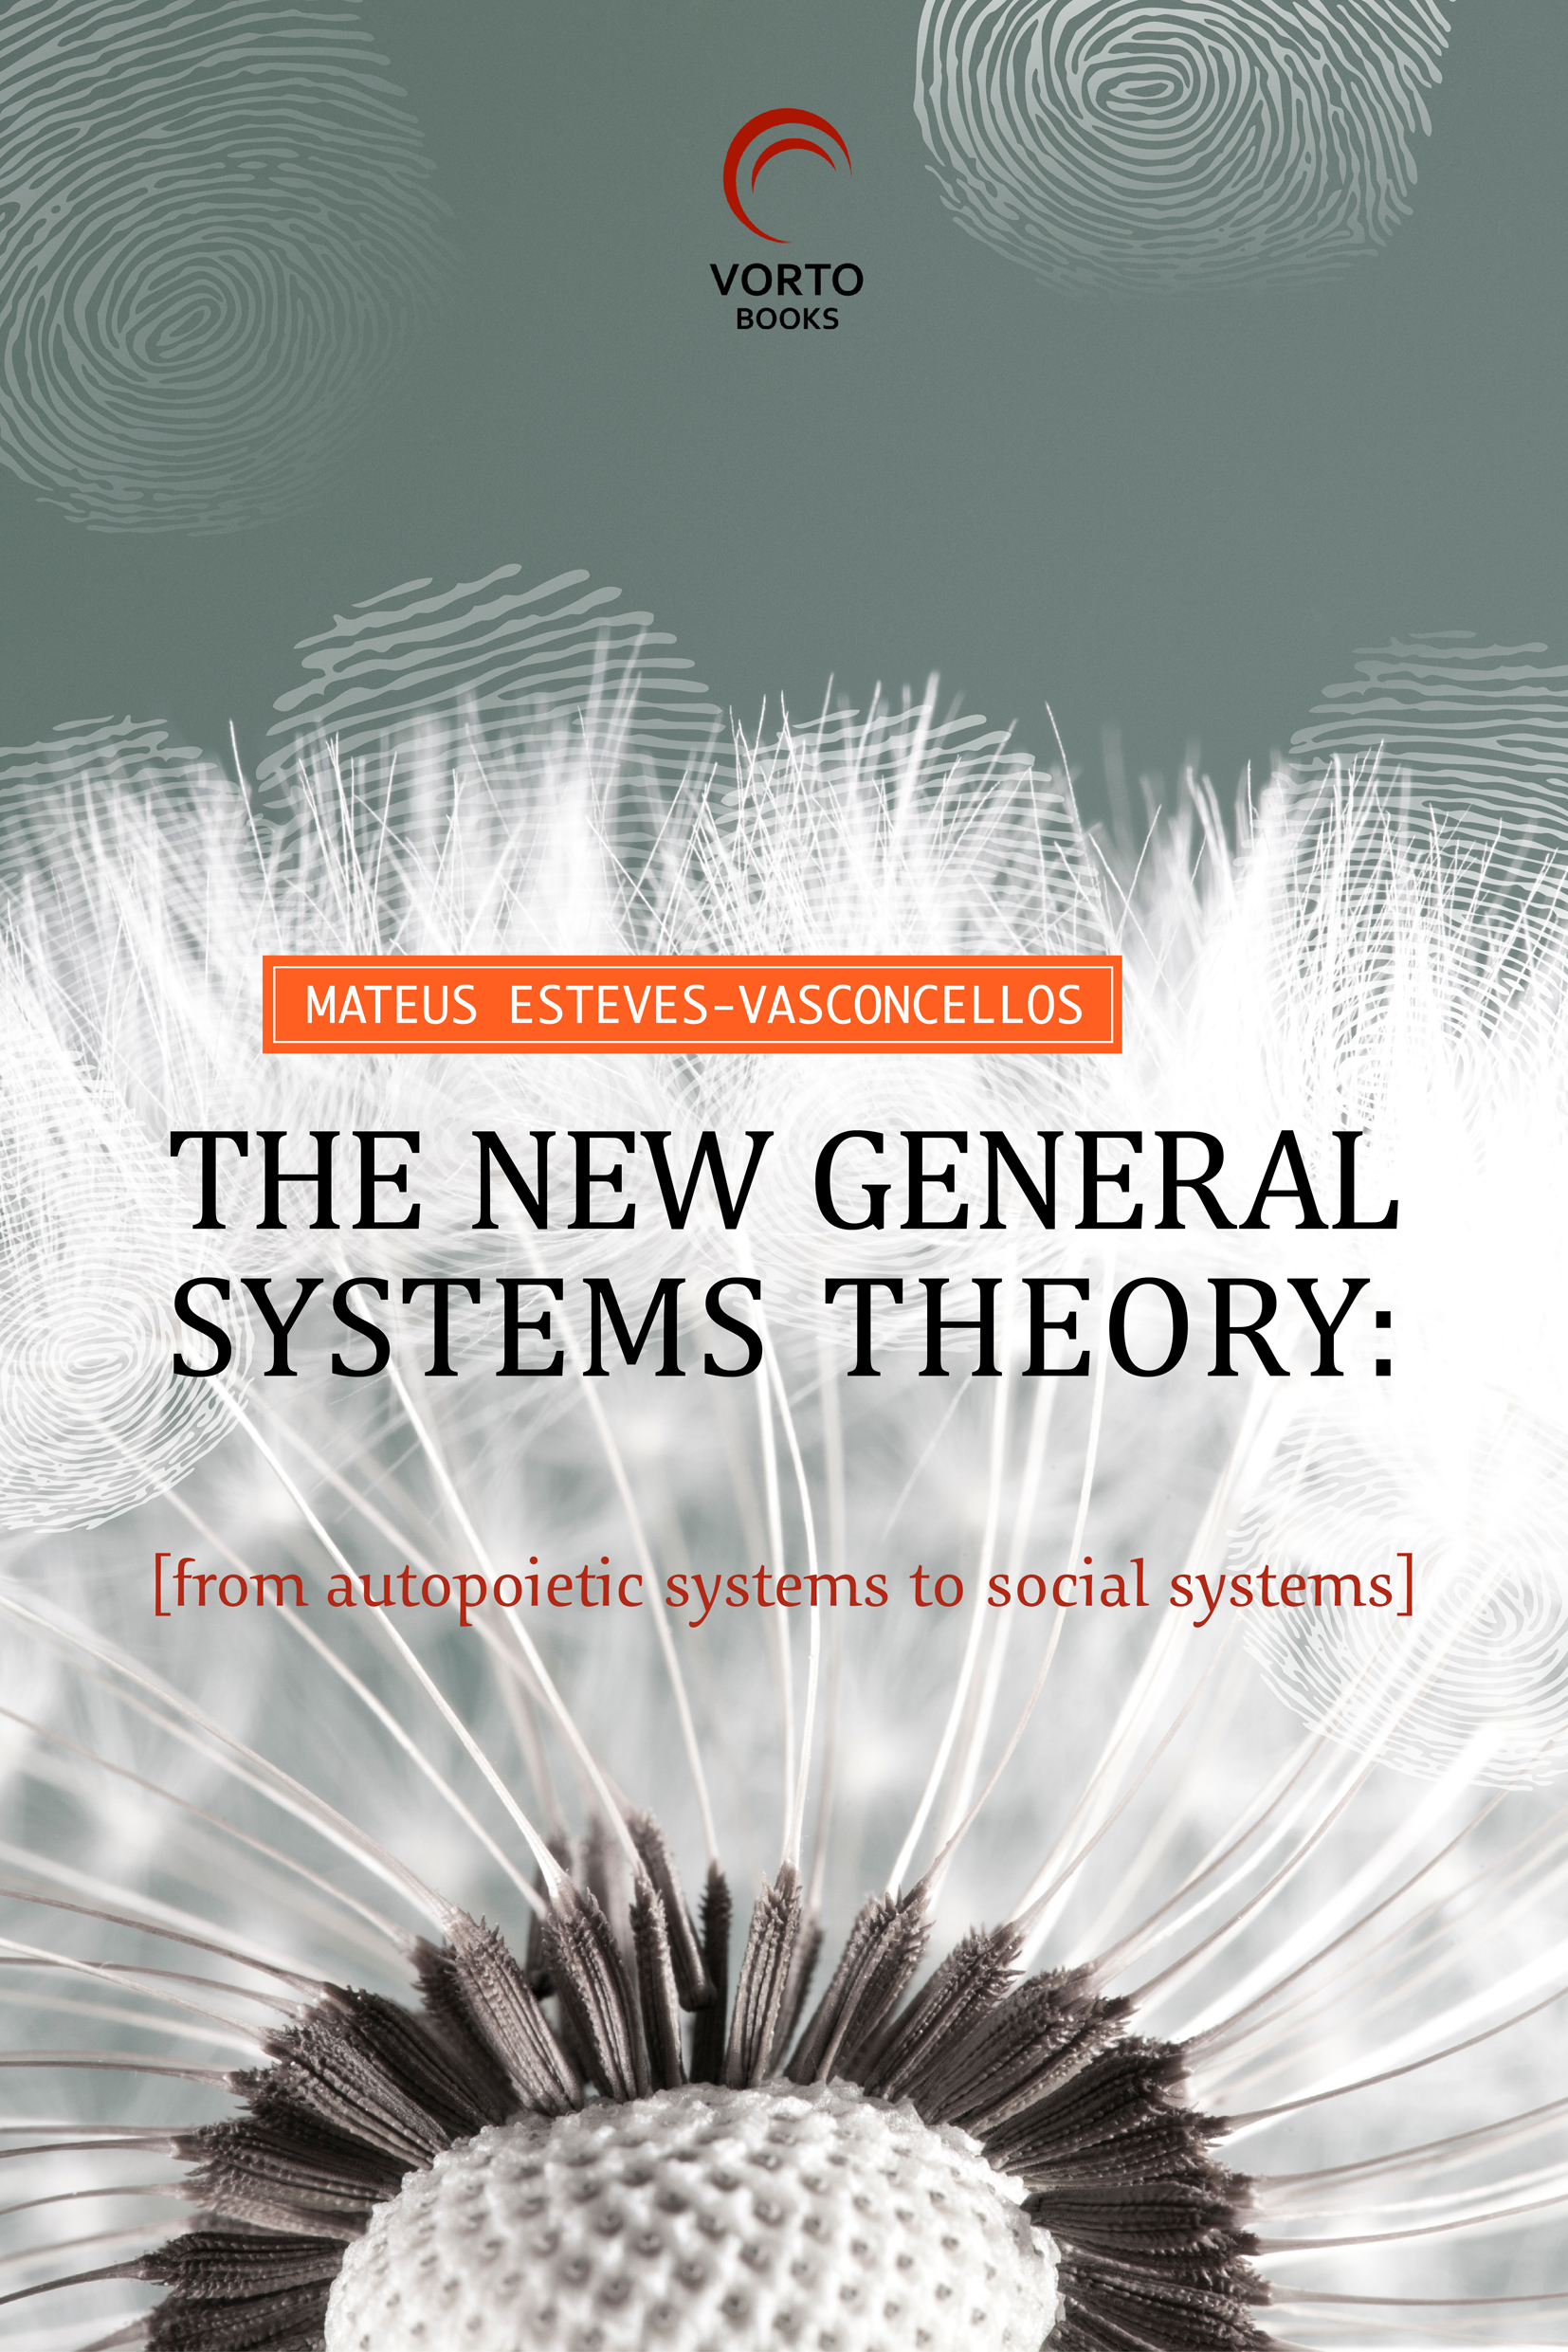 The New General Systems Theory